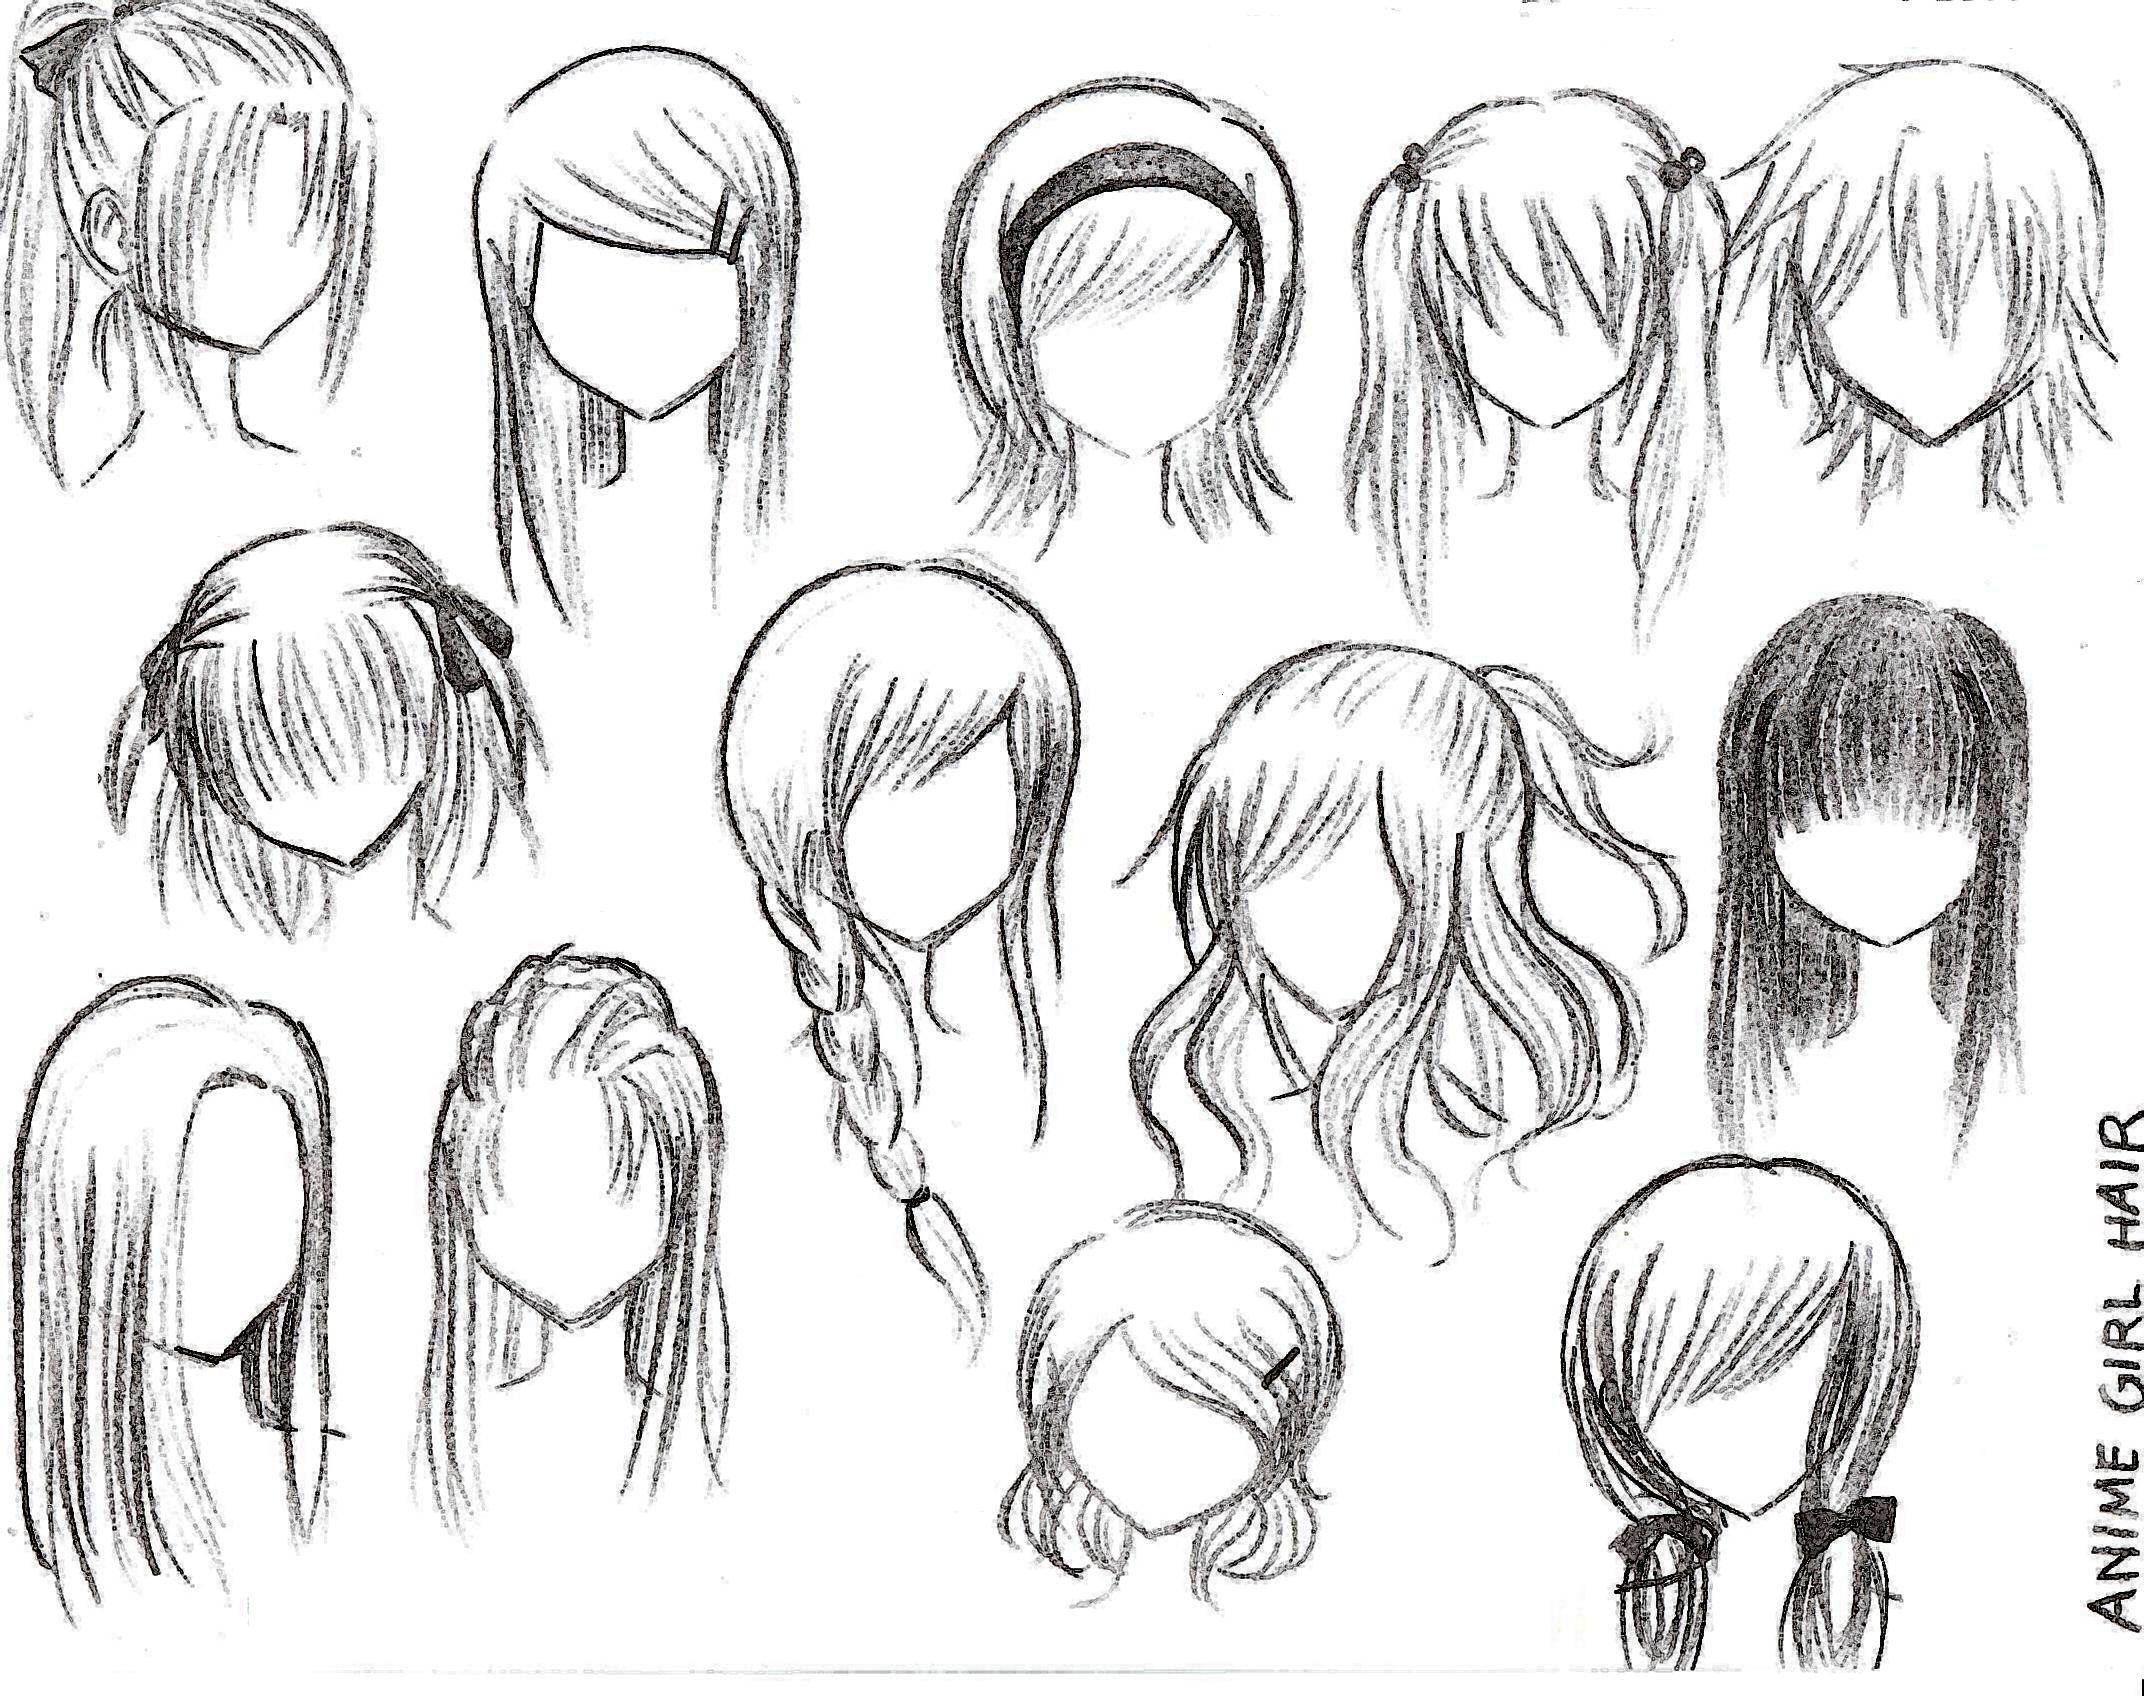 12 Anime Hairstyles Female Hairstyles Ideas Images Stock Photos  Vectors   Shutterstock